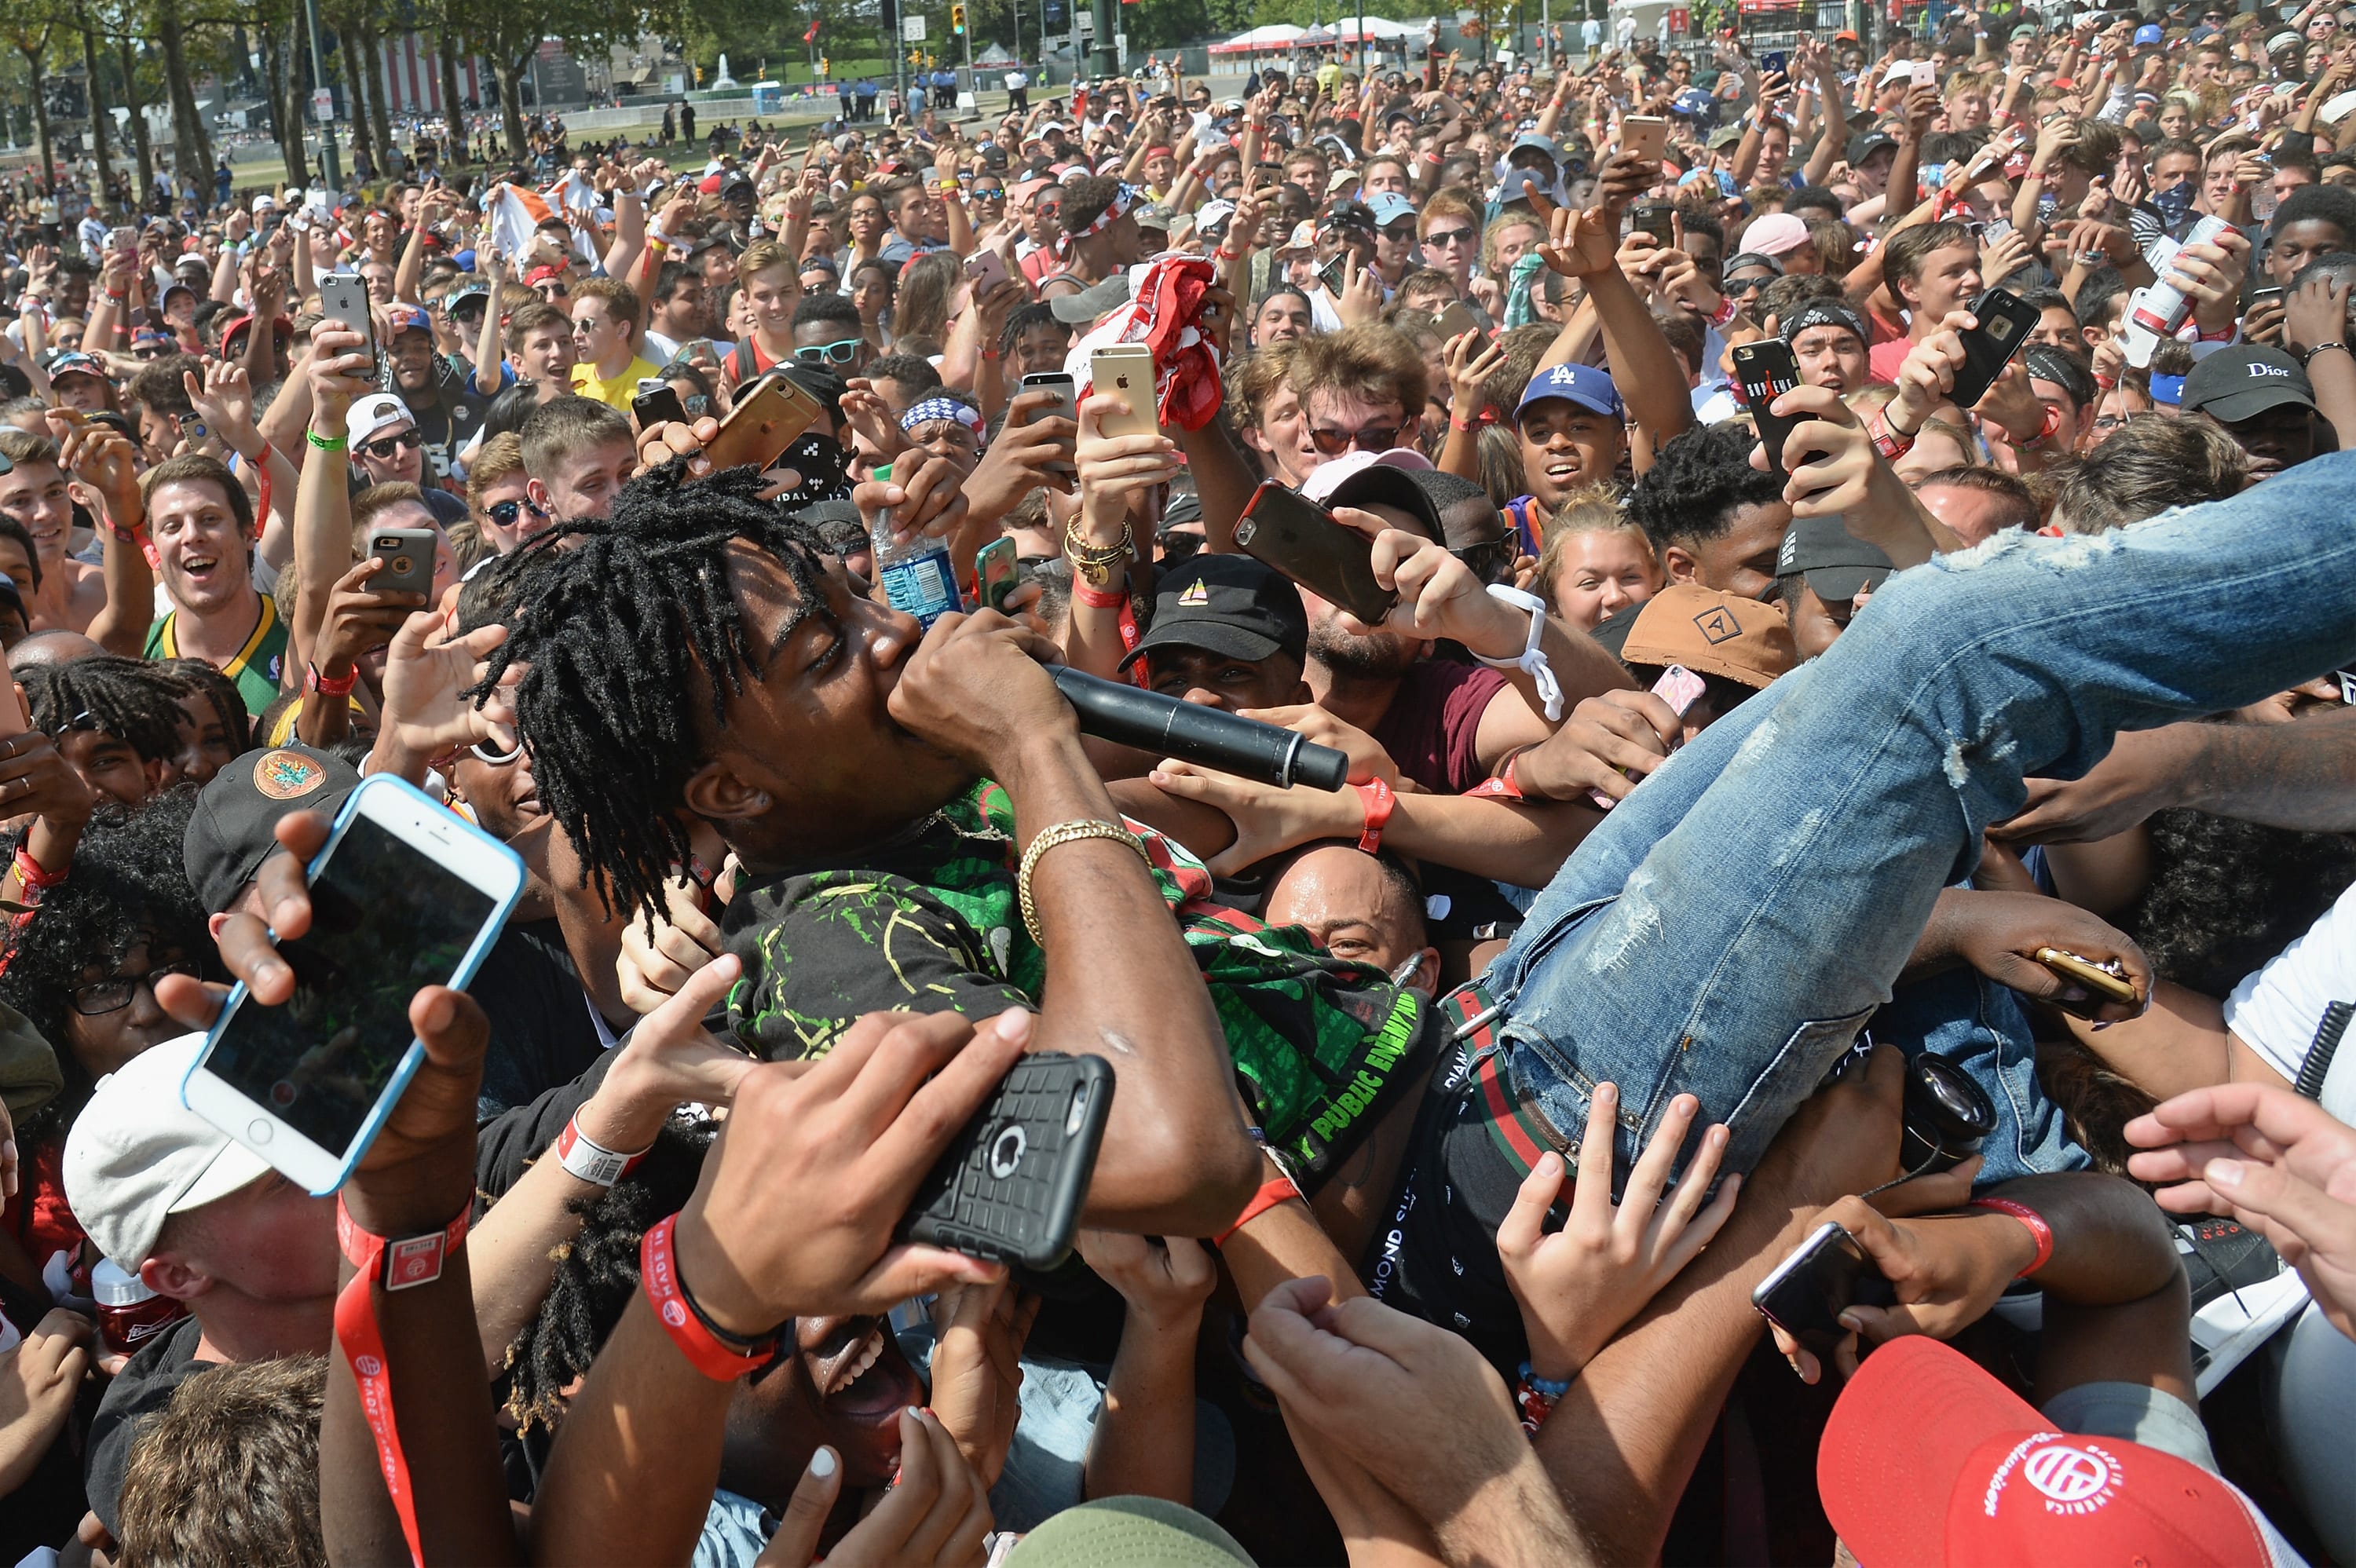 Playboi Carti Crowdsurfing at Made In America Festival